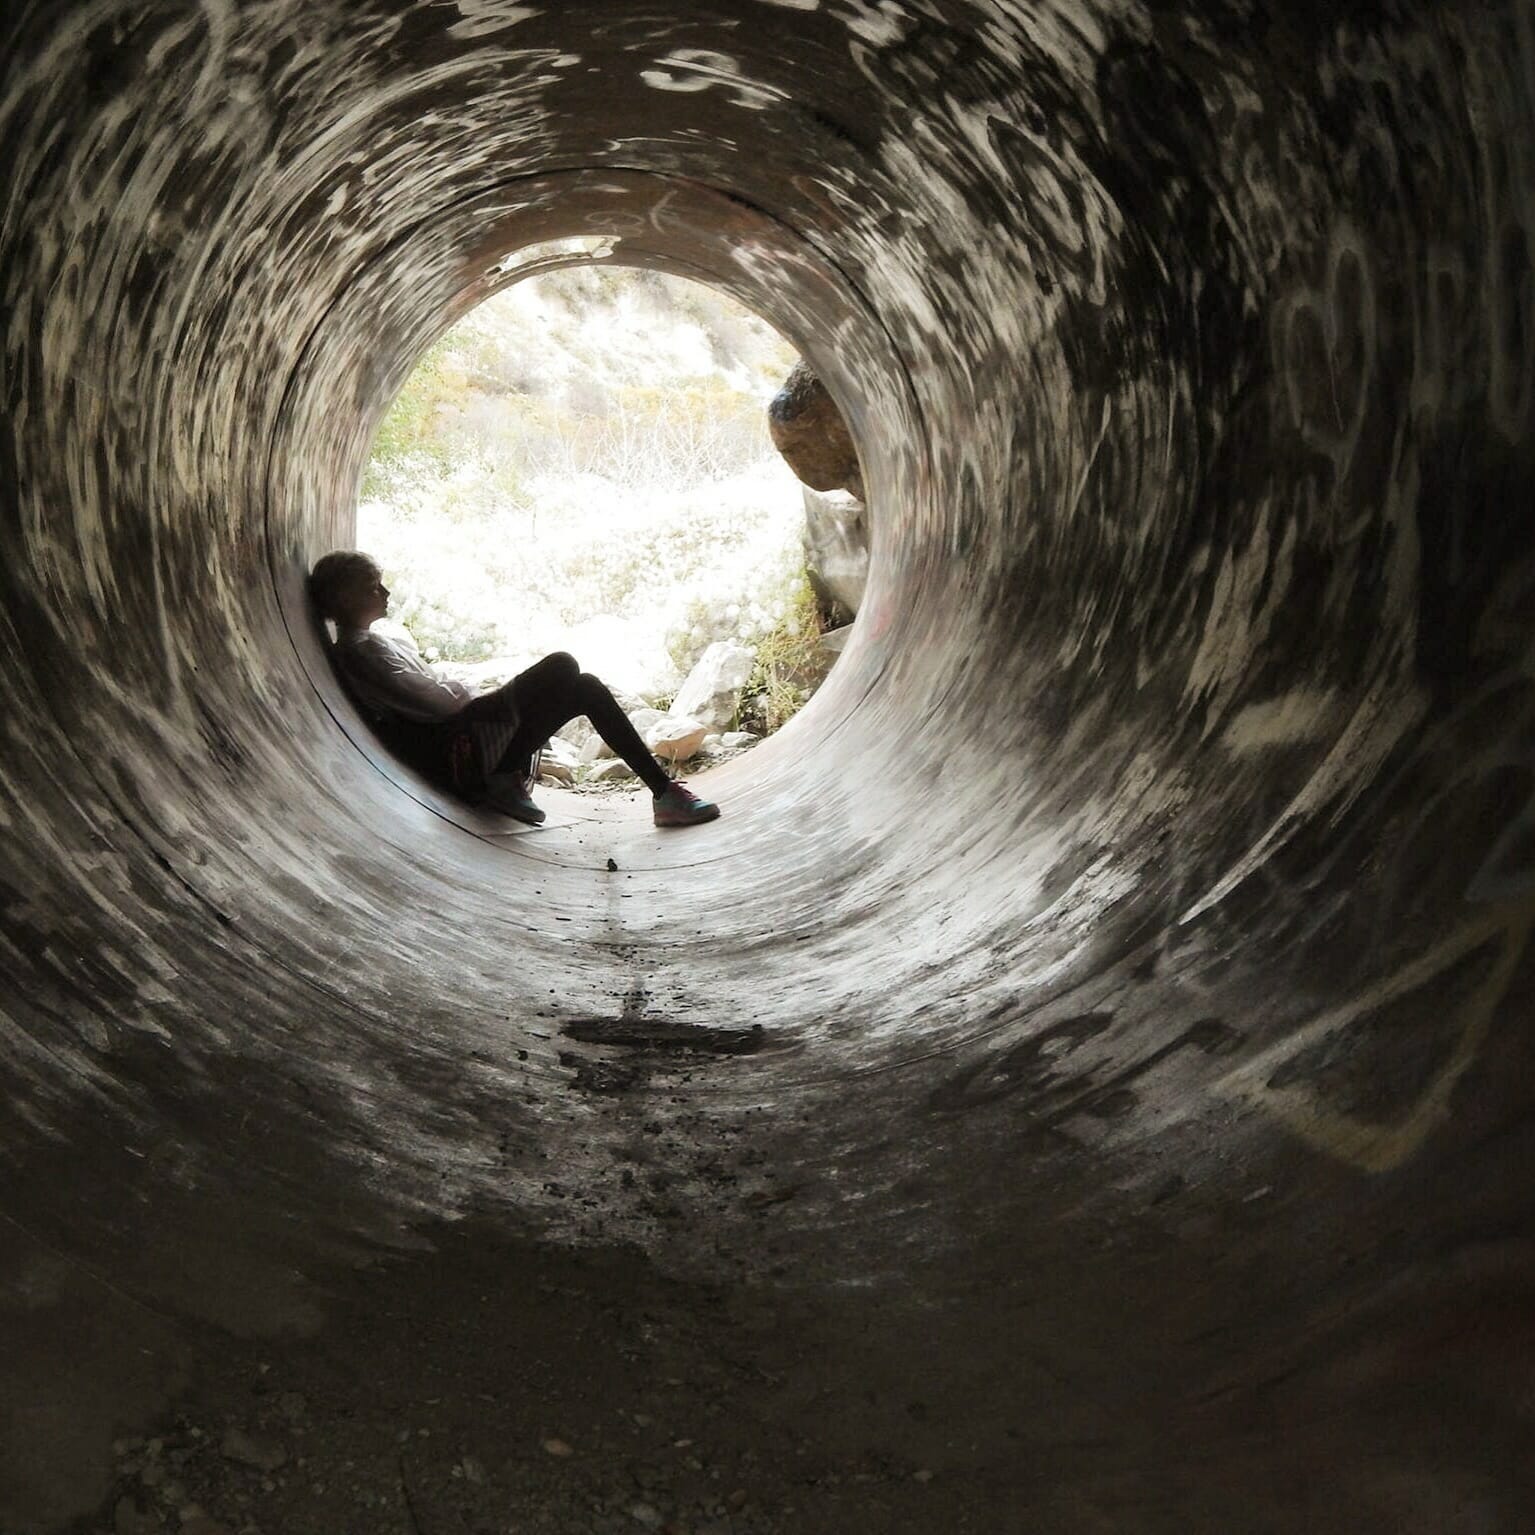 Image of a child inside a tunnel